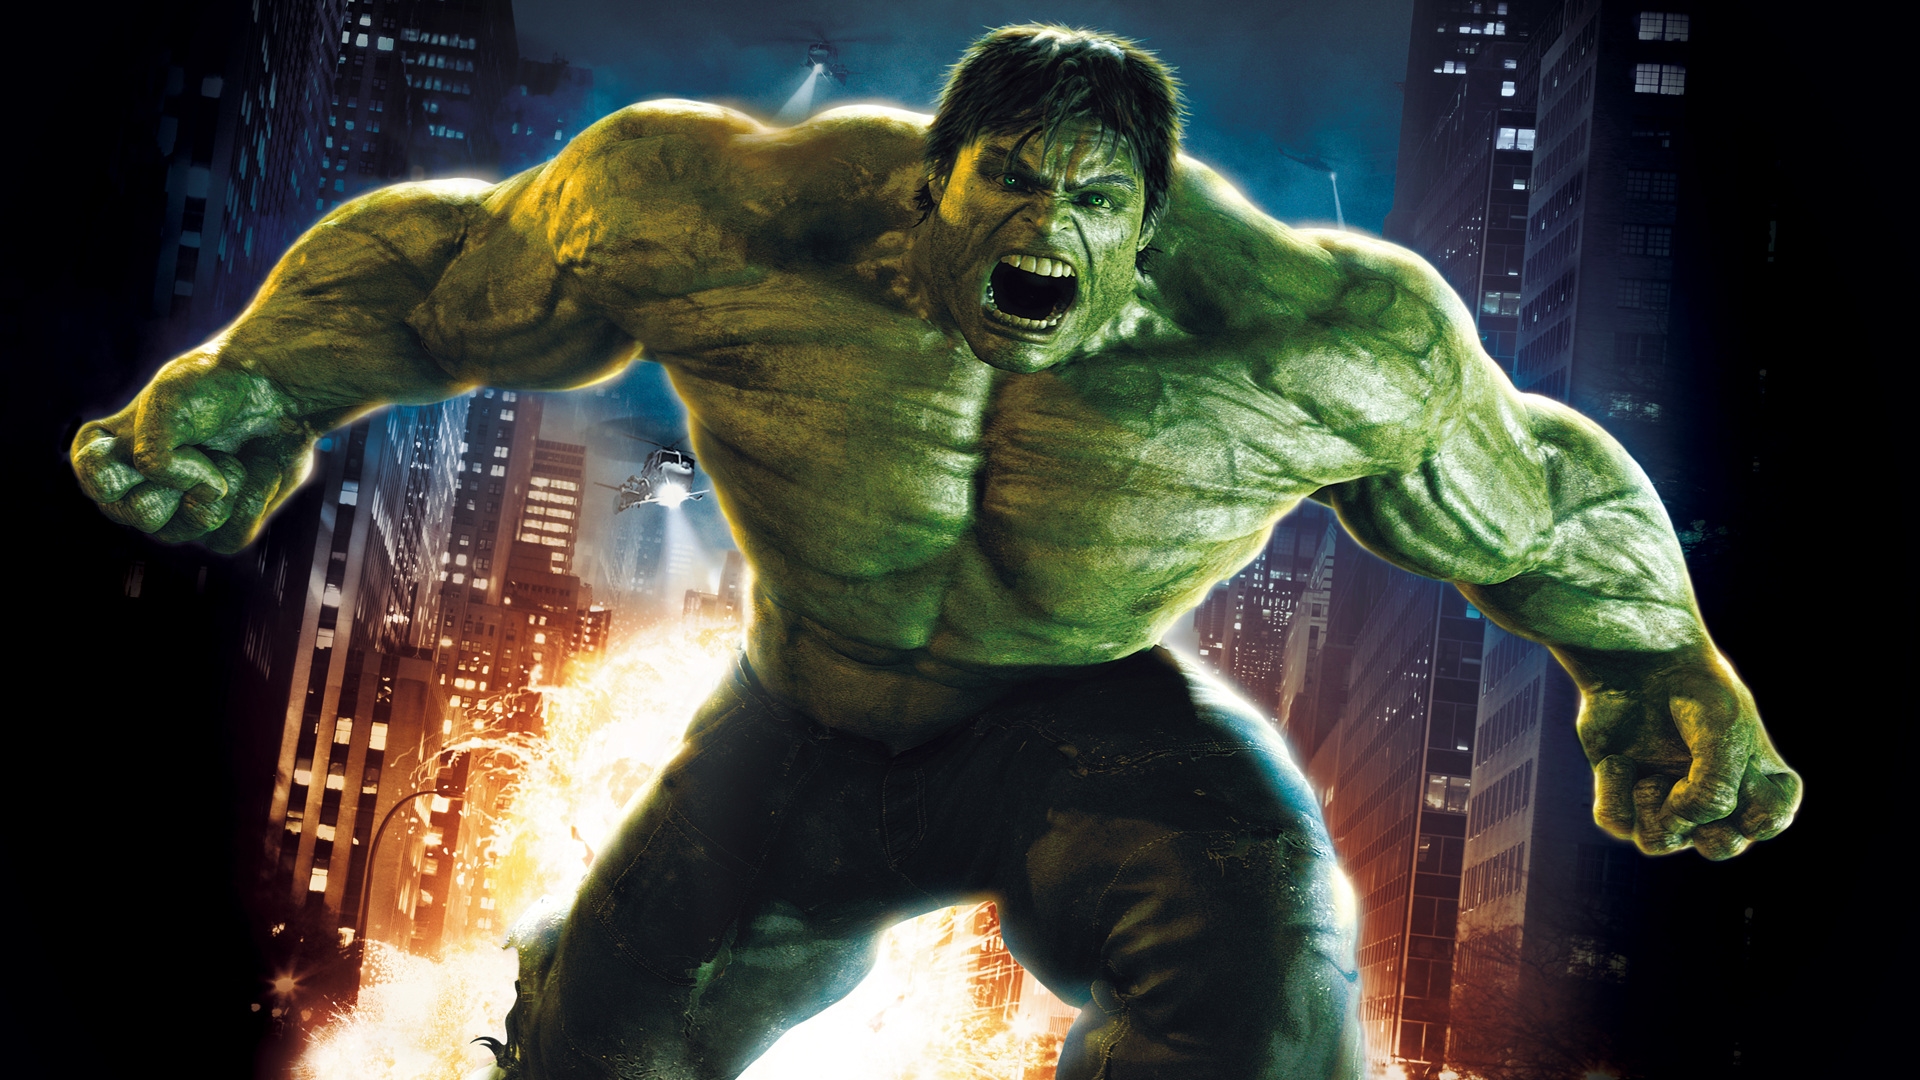 Alternate Versions of Hulk You Might Not Know About